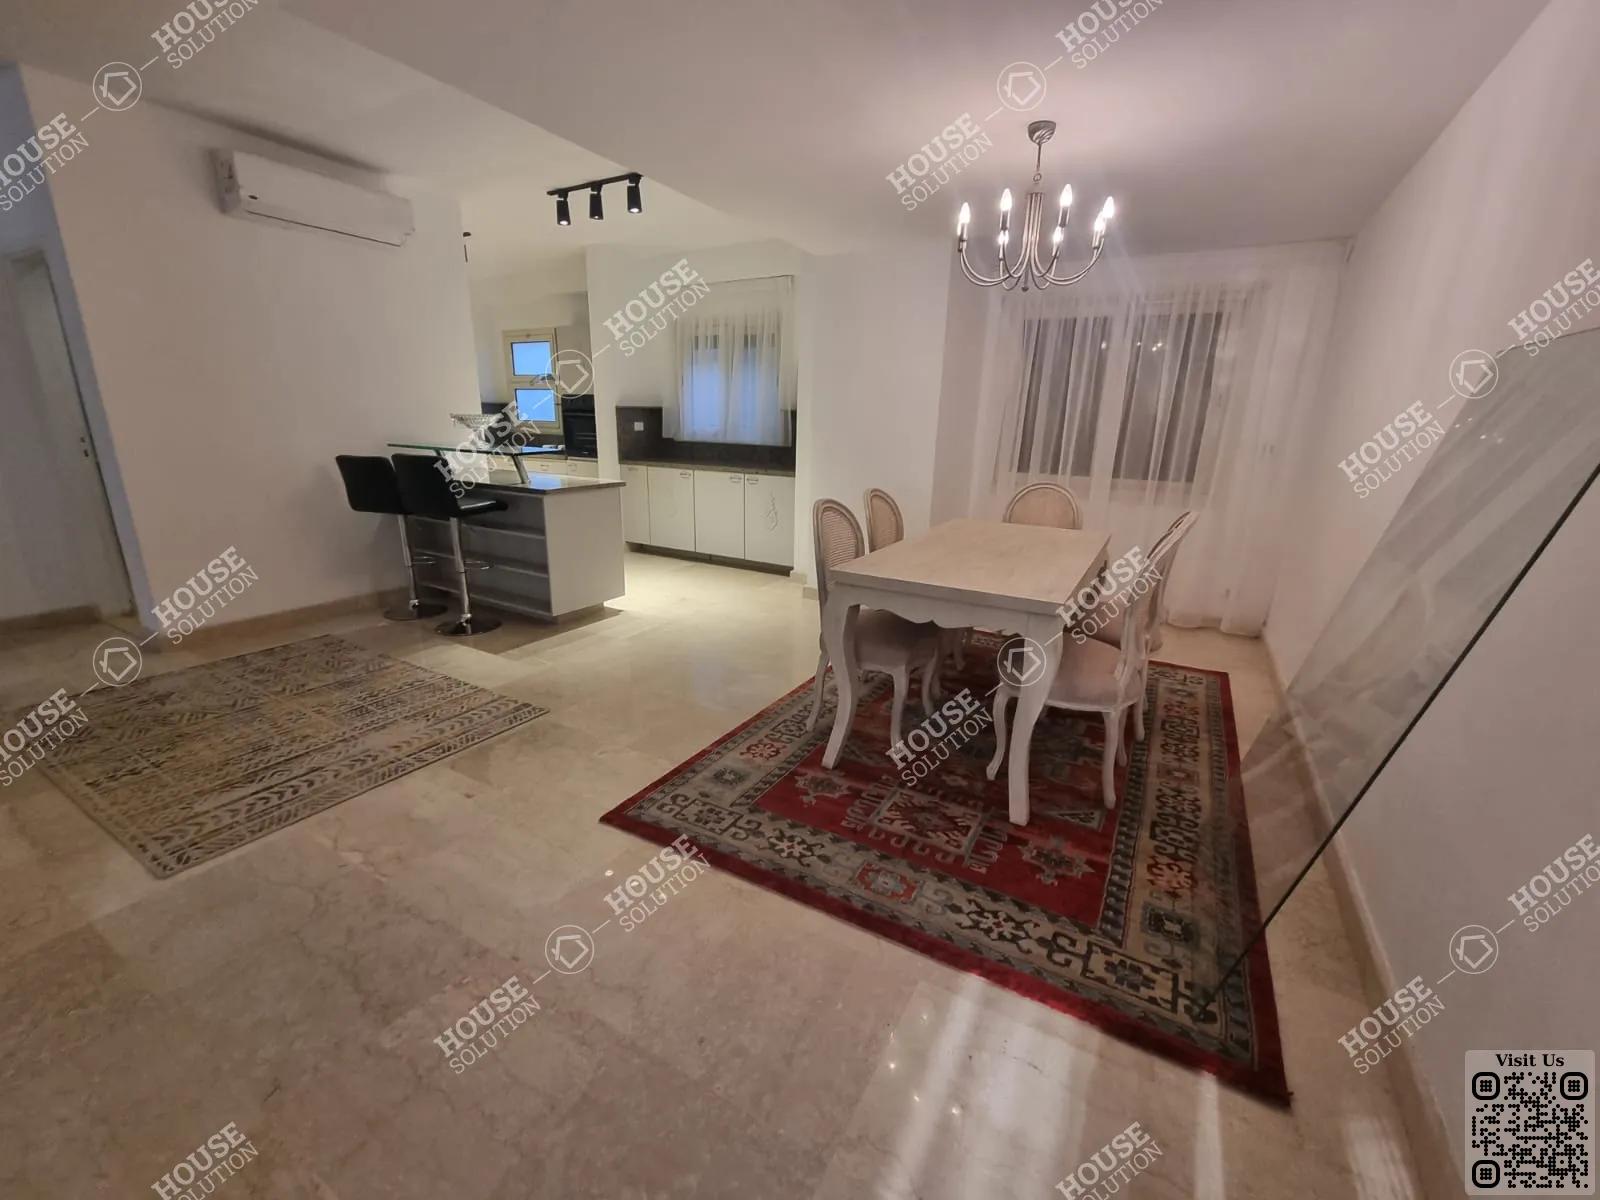 DINING AREA @ Ground Floors For Rent In Maadi Maadi Sarayat Area: 150 m² consists of 2 Bedrooms 3 Bathrooms Modern furnished 5 stars #5614-2